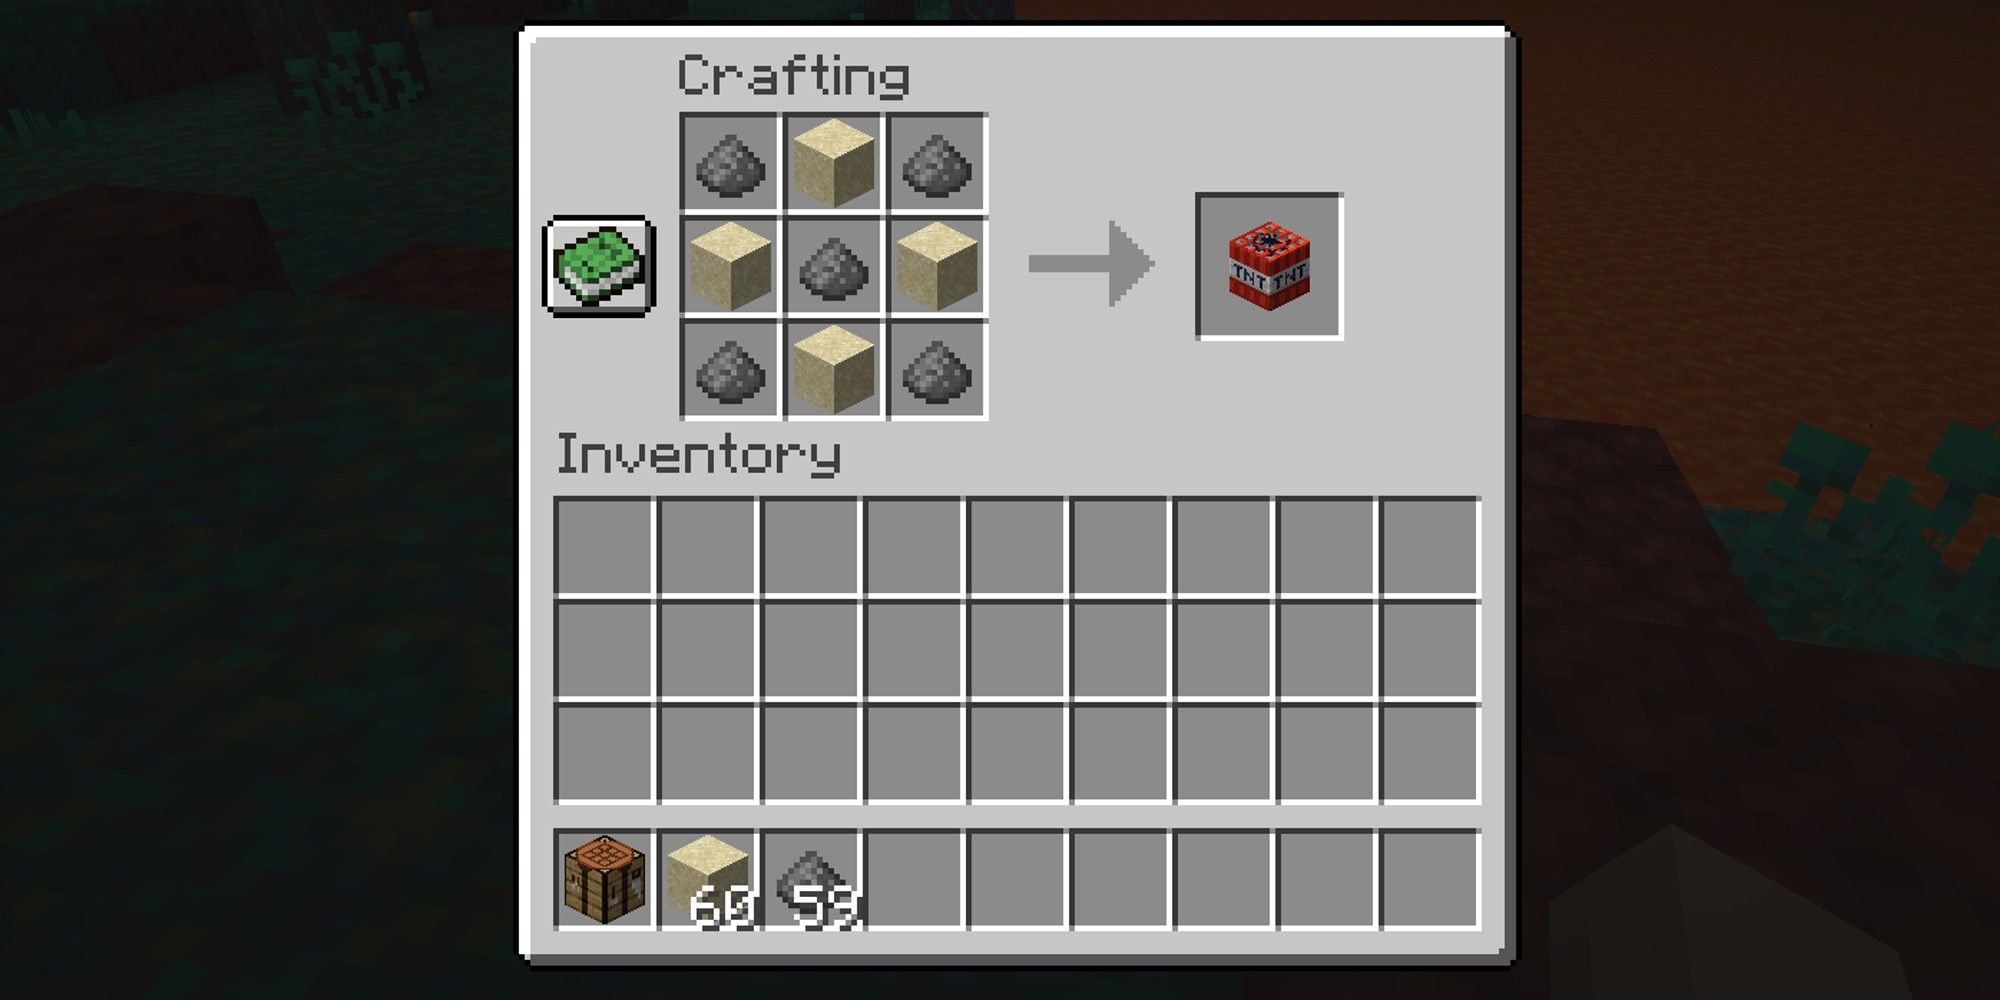 crafting menu with recipe for TNT